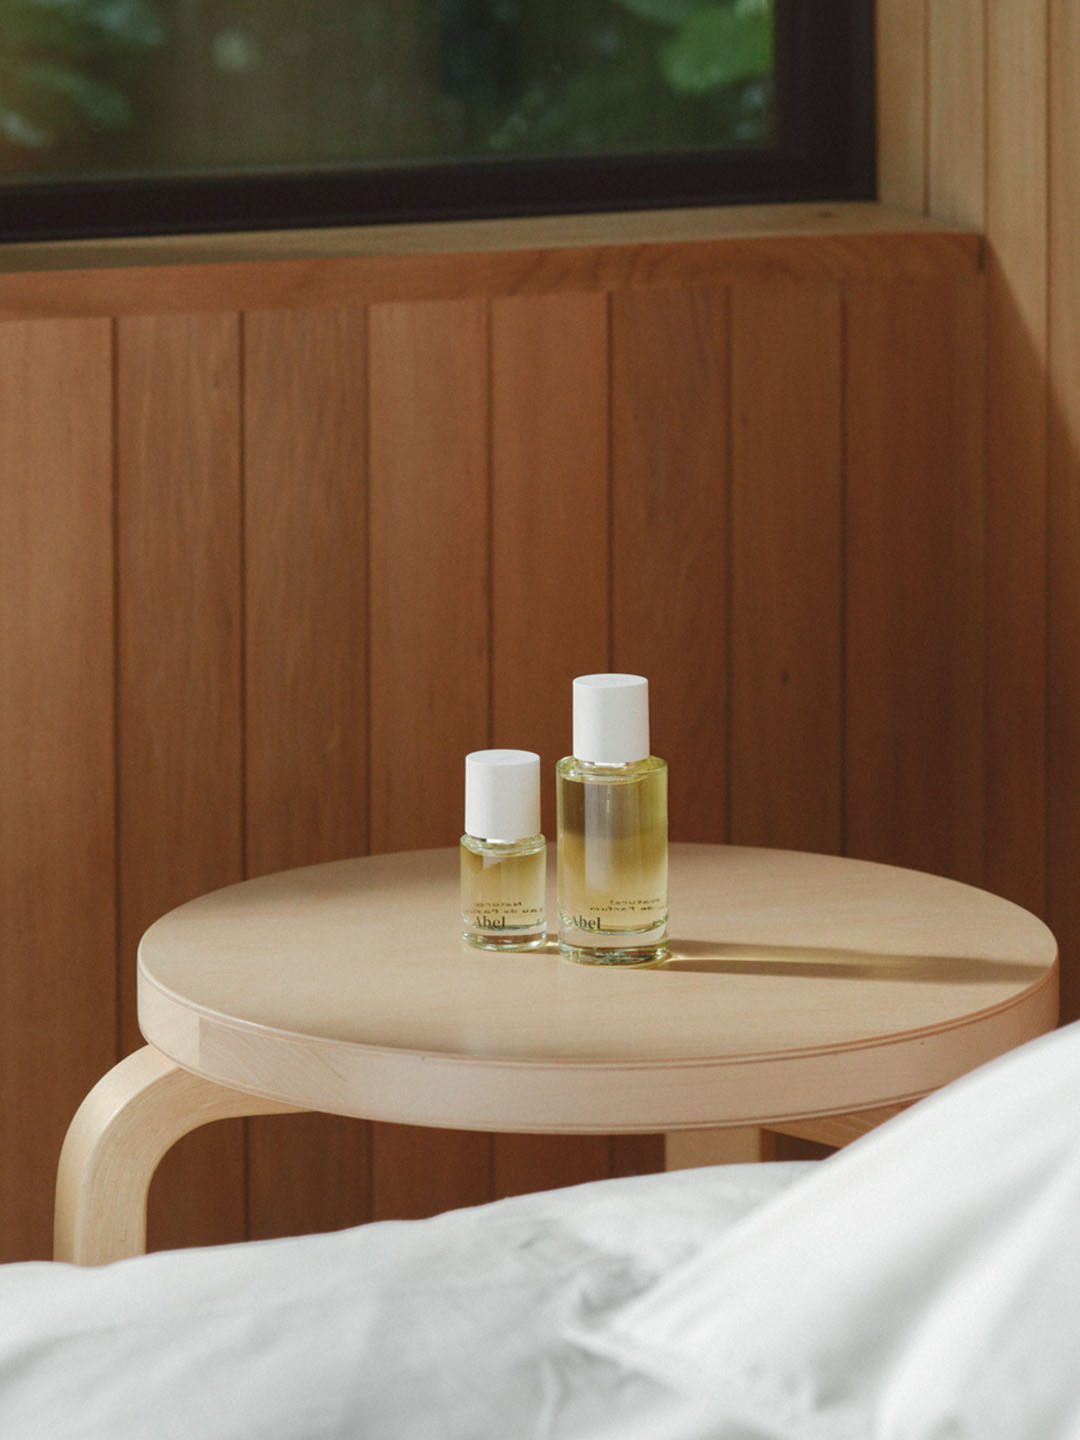 Two bottles of Abel's Pink Iris – a contemporary, classic floral essential oils, Sichuan pepper and iris, on a wooden table in a bedroom.